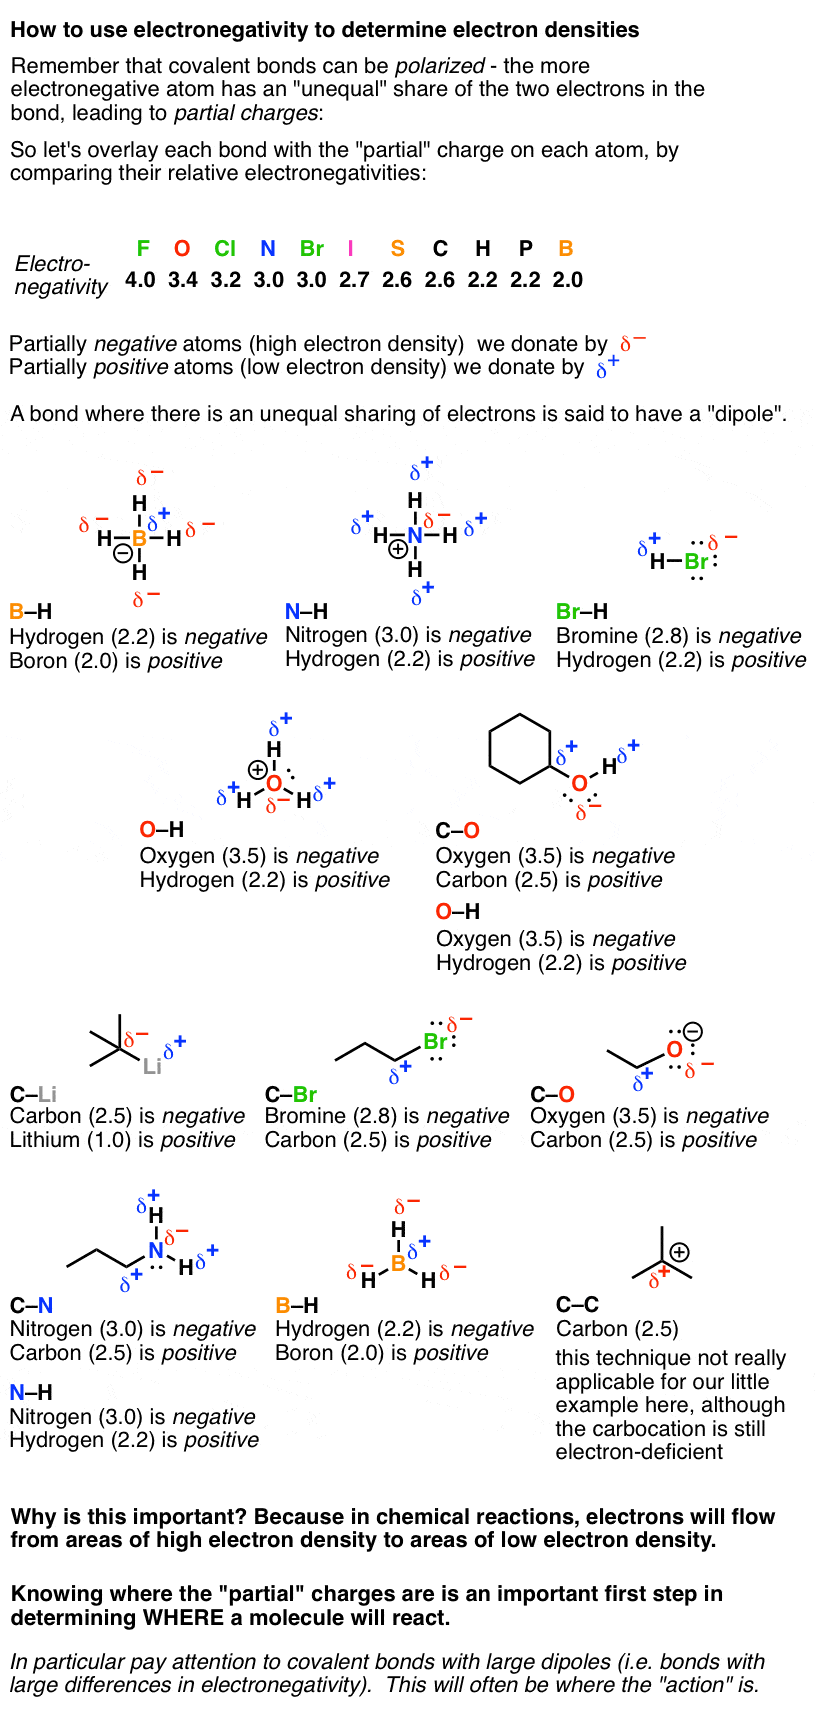 how-to-use-electronegativity-to-determine-electron-densities-compare-differences-to-get-dipoles